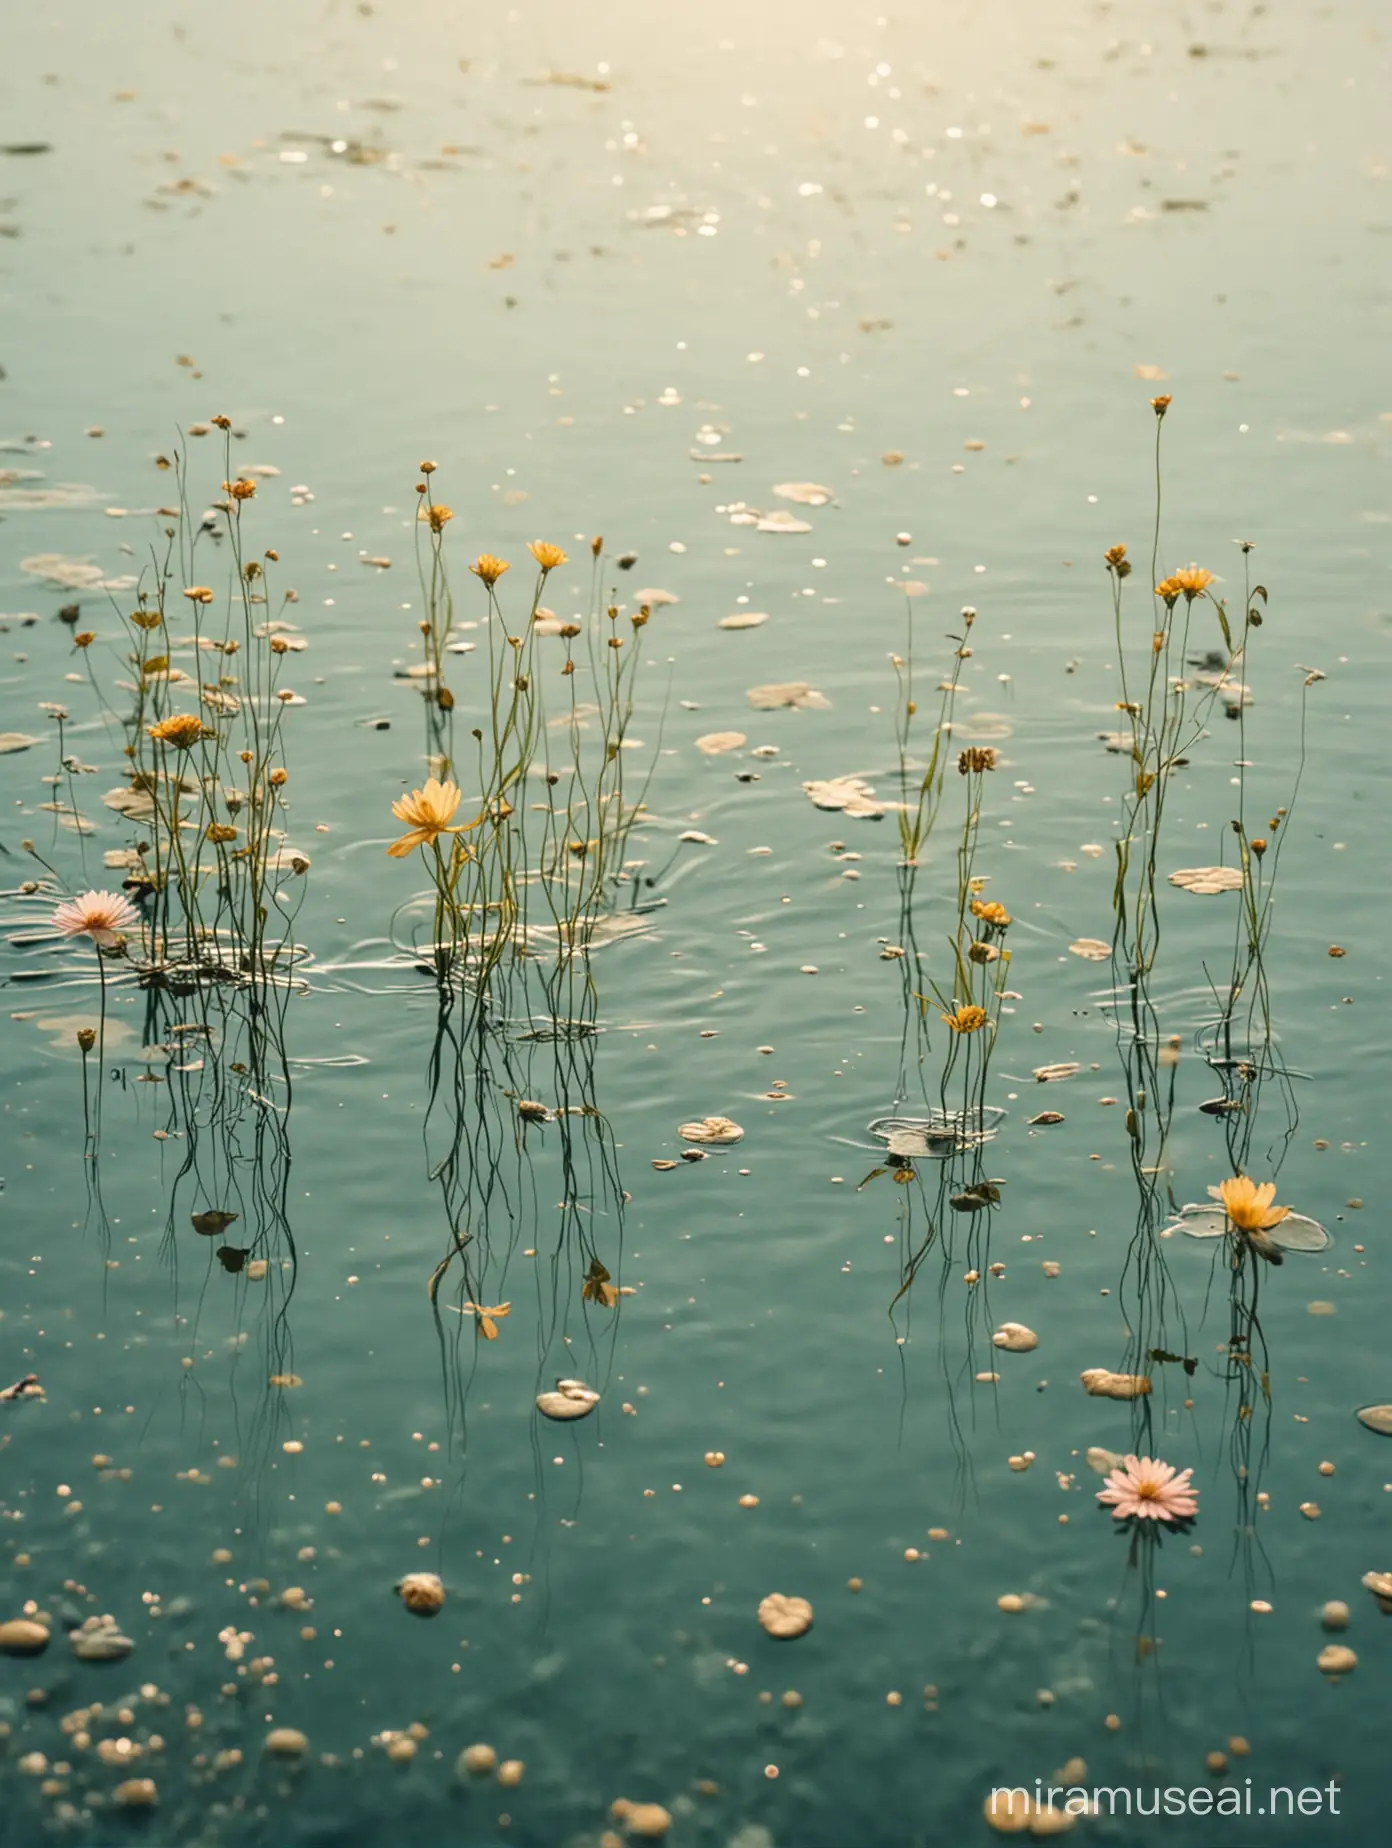 Tranquil Water Scene with Aquatic Flora and Vintage Cinematographic Aesthetic